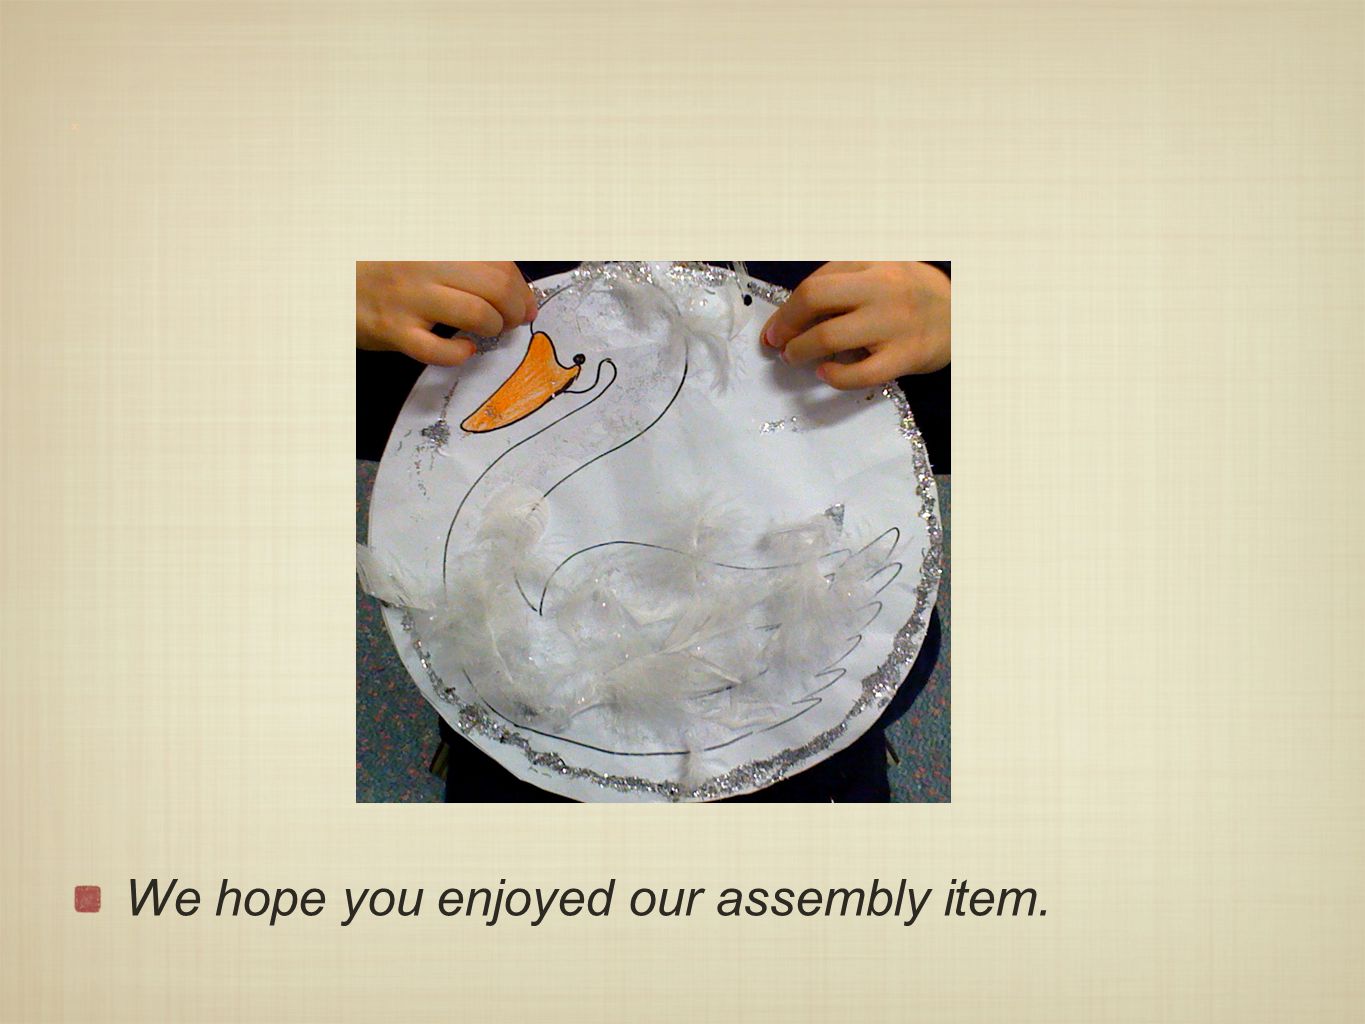 x We hope you enjoyed our assembly item.